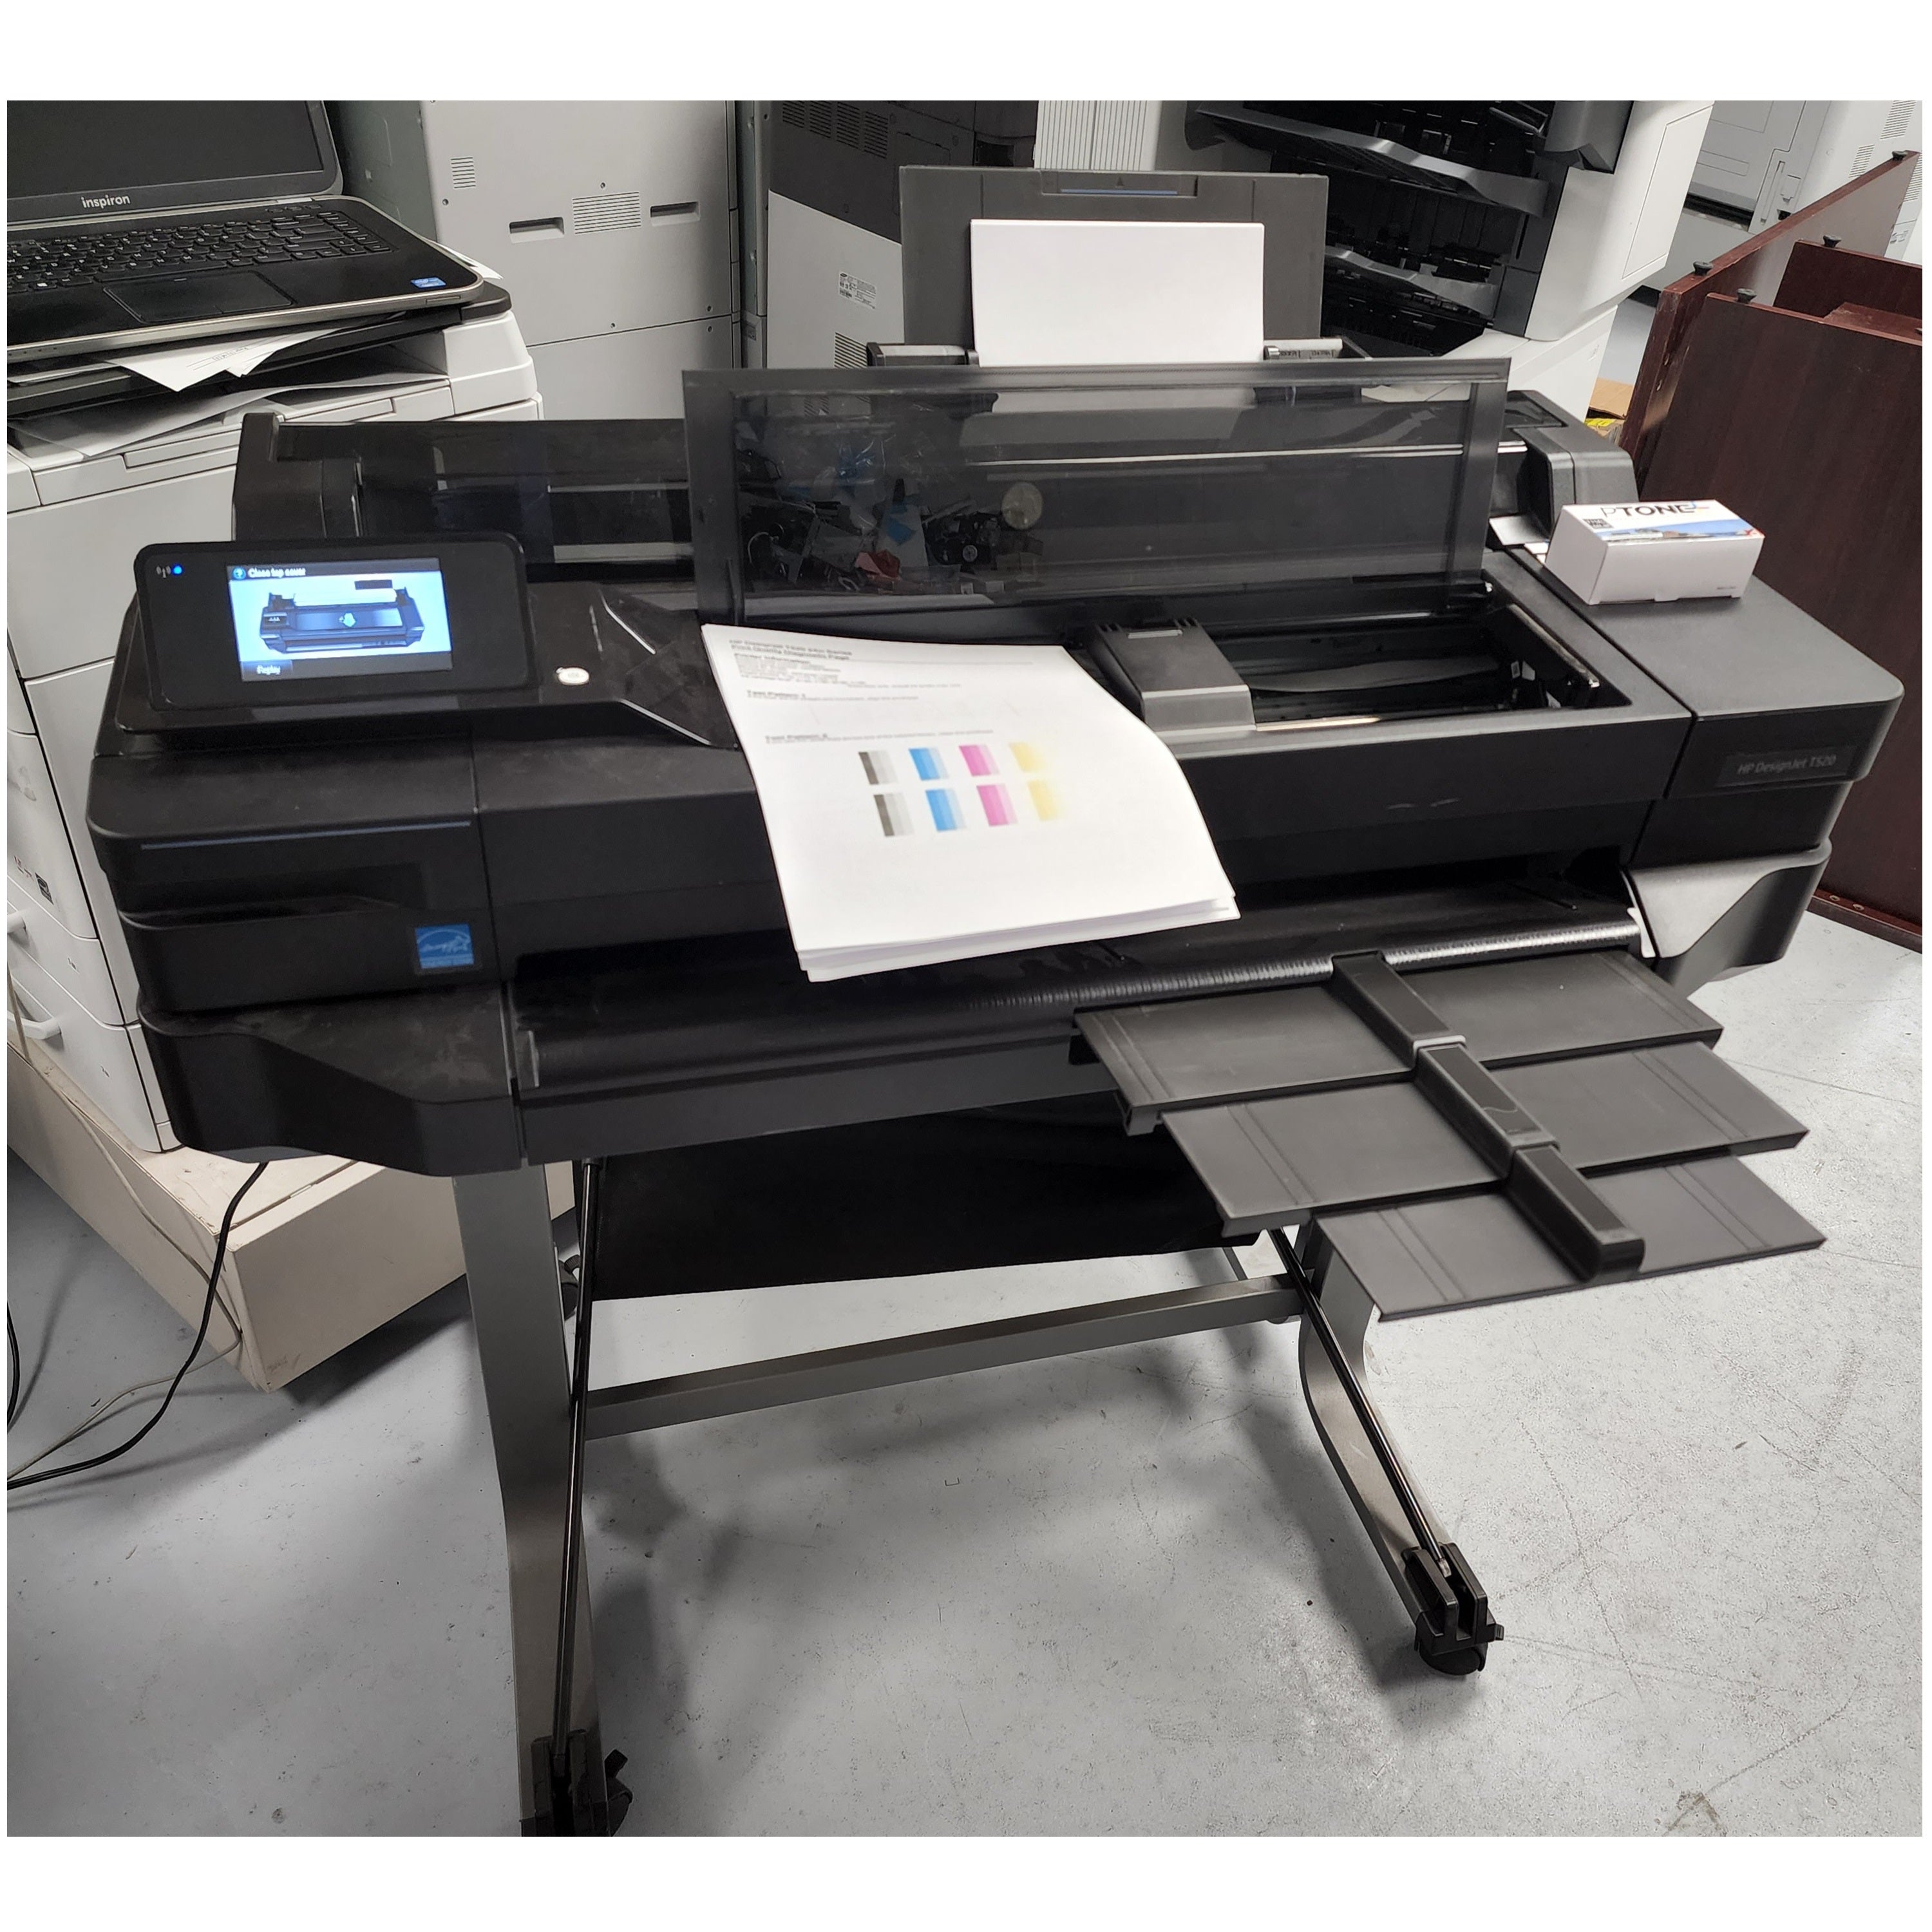 Absolute Toner $25/Month HP DesignJet T520 Large Wide Format Color Wireless Inkjet ePrinter With Web Connectivity For Drawing Large Format Printer